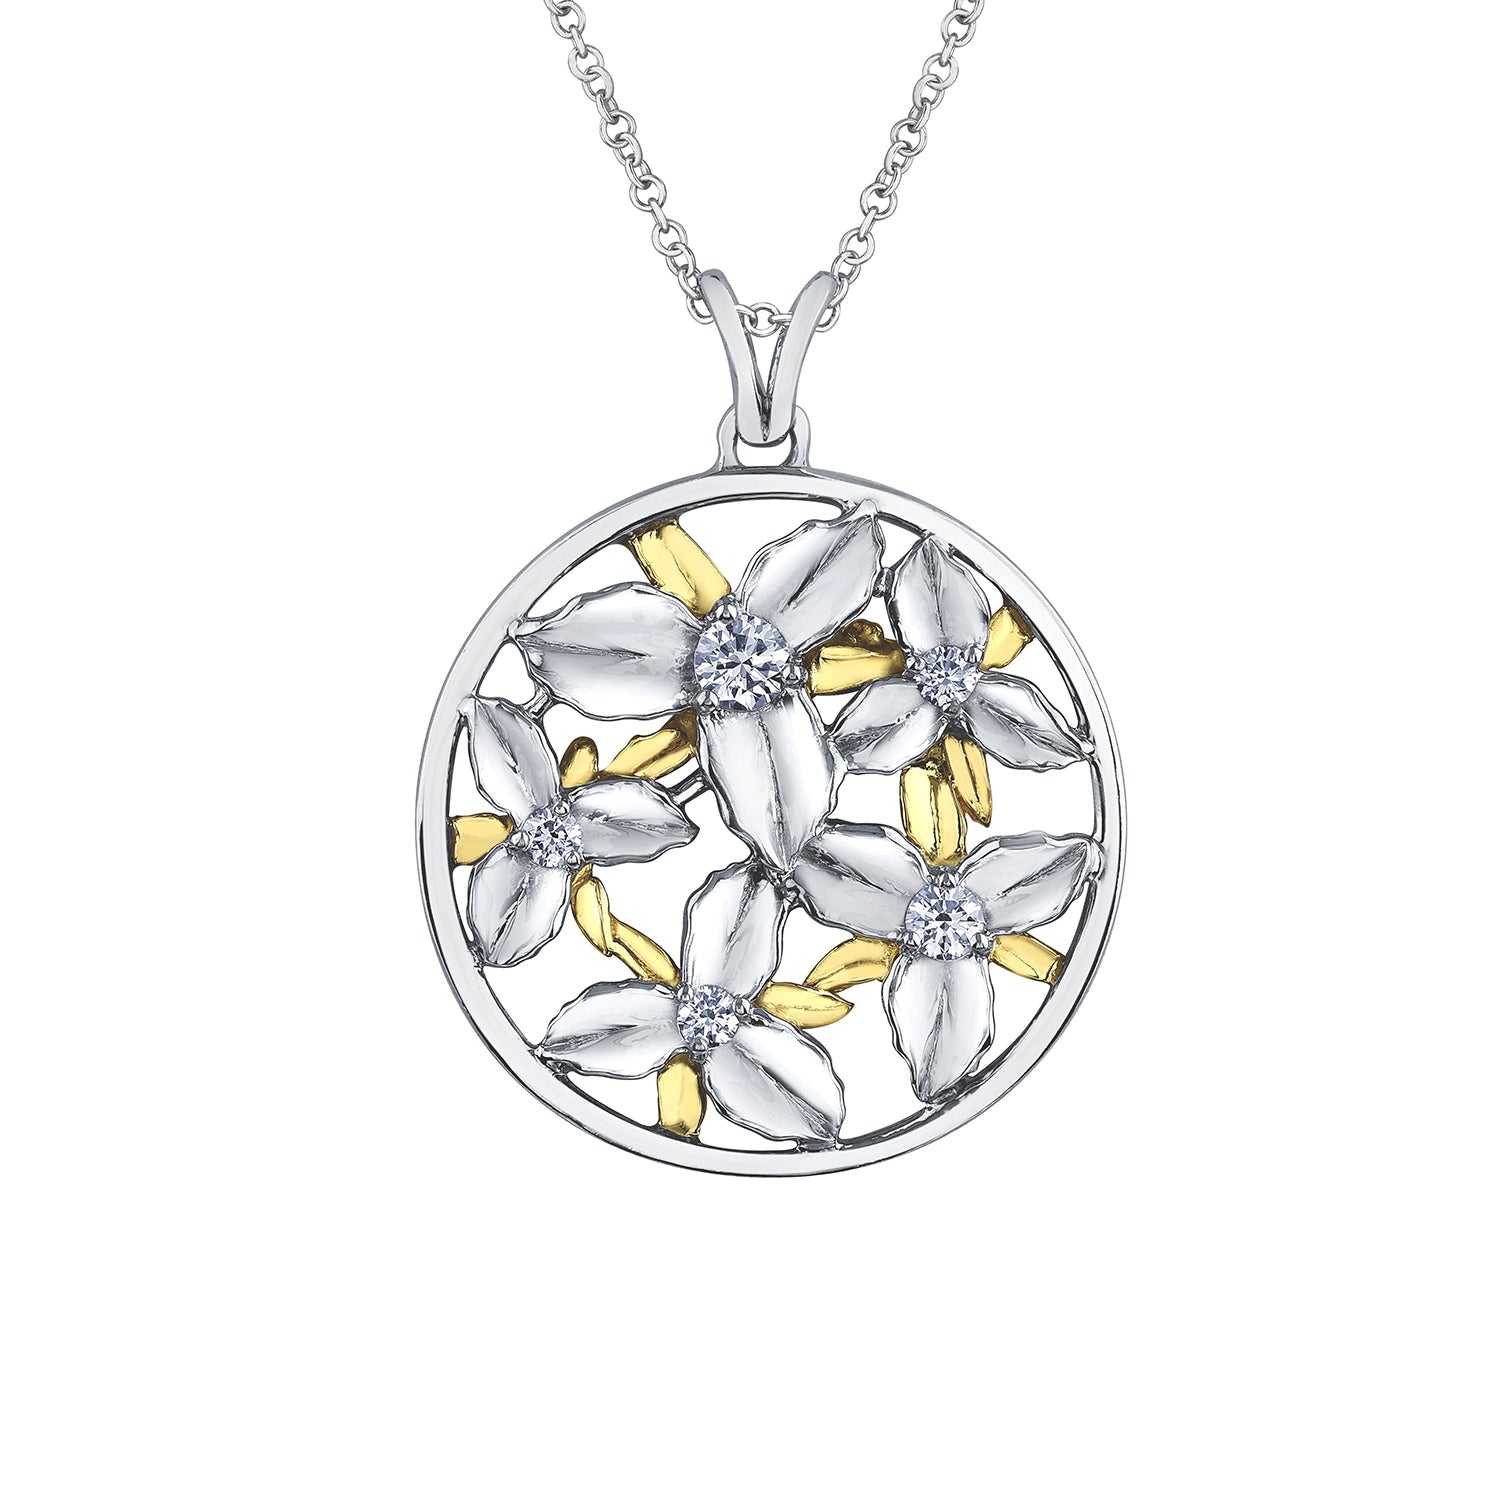 Crafted in 14KT white and yellow Certified Canadian Gold, this pendant features Ontario trillium flowers set with round brilliant-cut Canadian diamonds